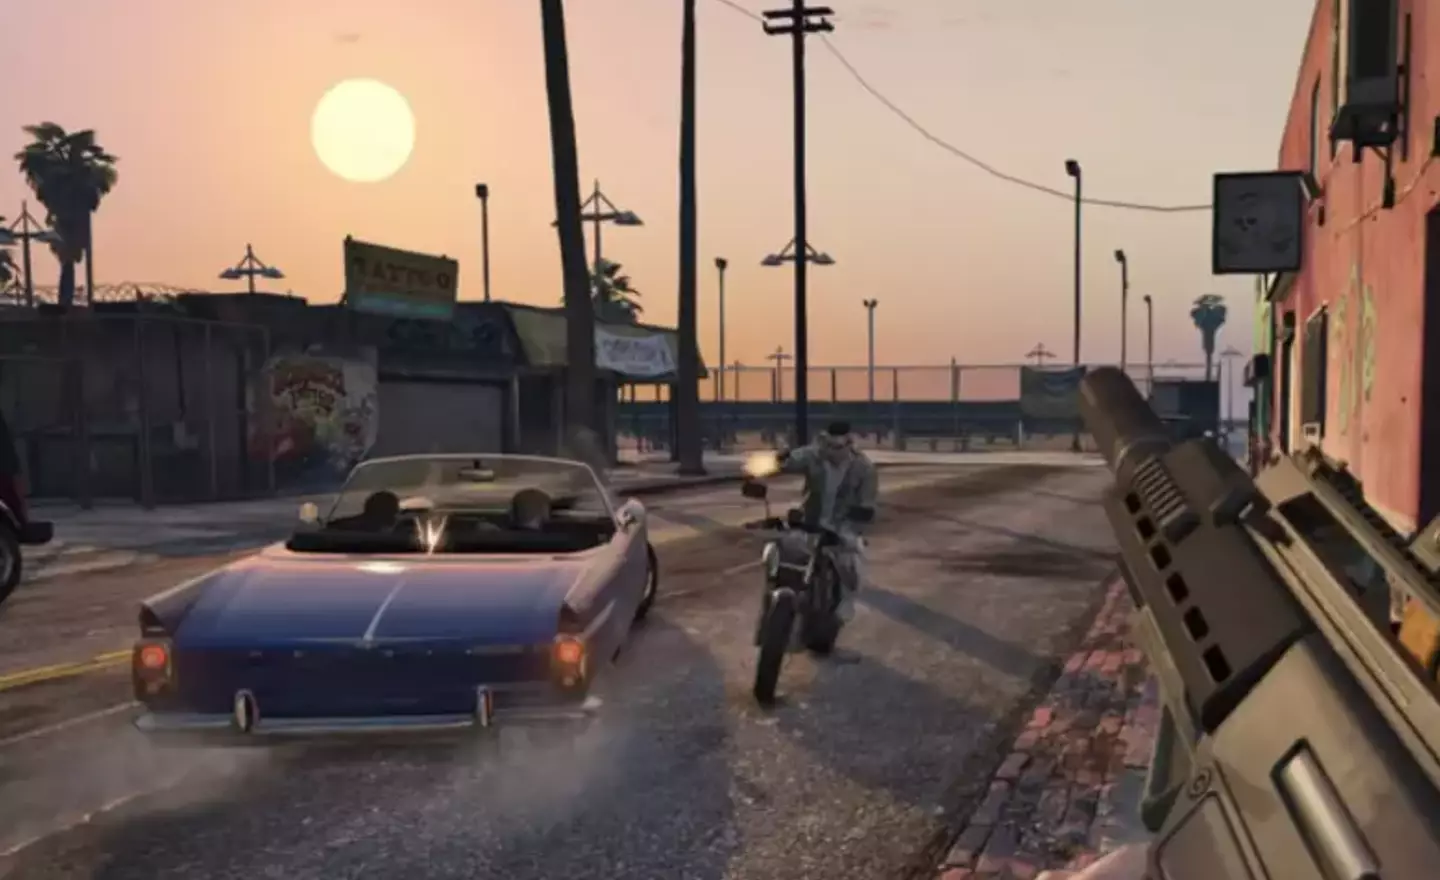 GTA VI is set to be the most expensive game of all time.